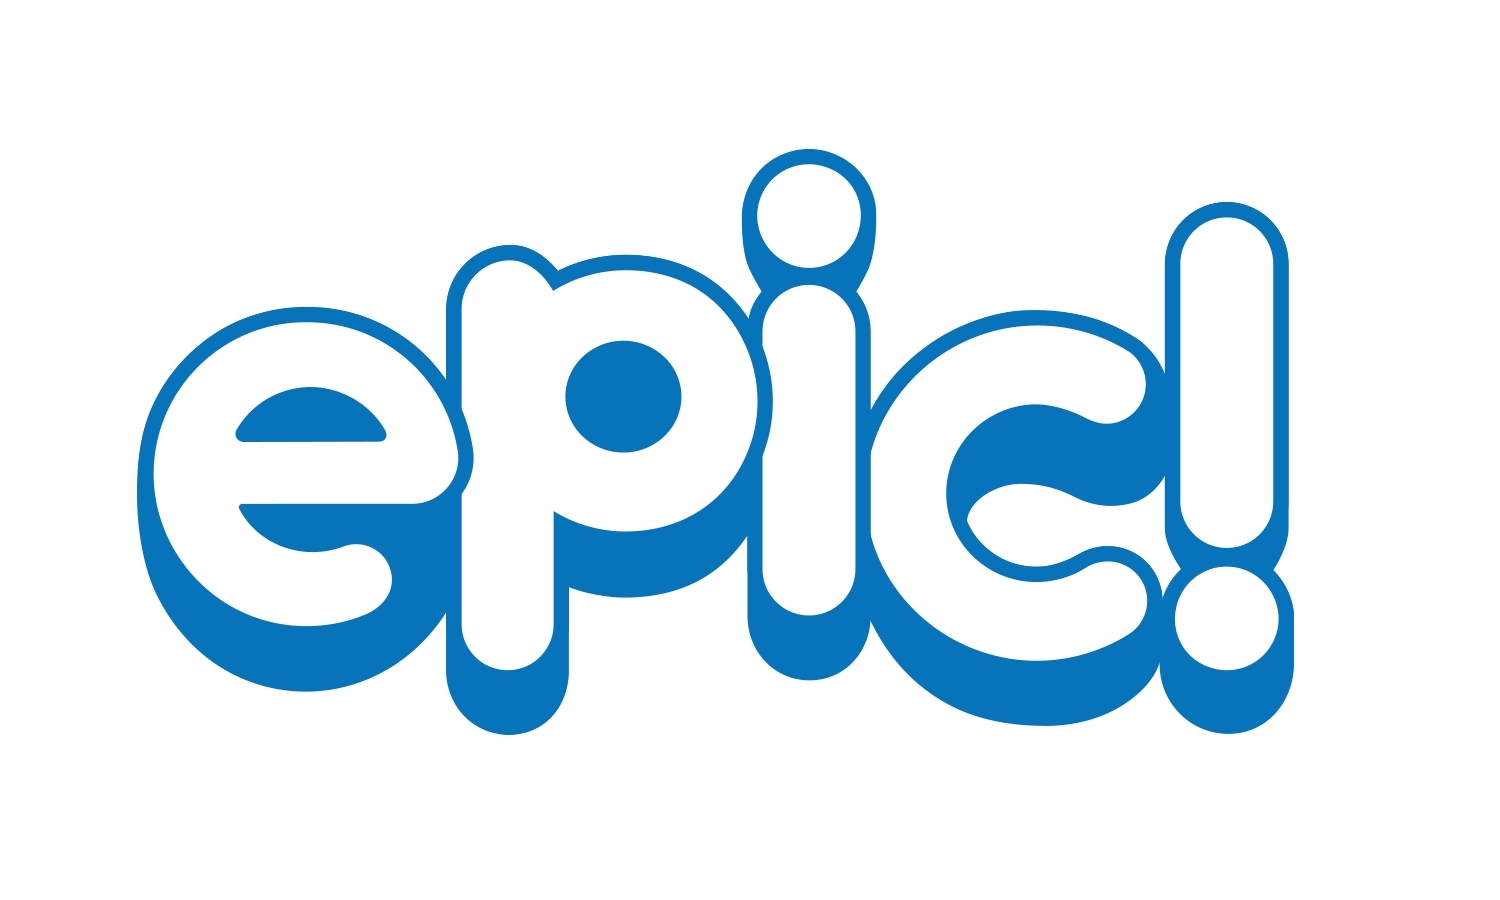 Epic Announces Free Support for Educators, Students and Families Impacted  by COVID-19 School Closures | Business Wire